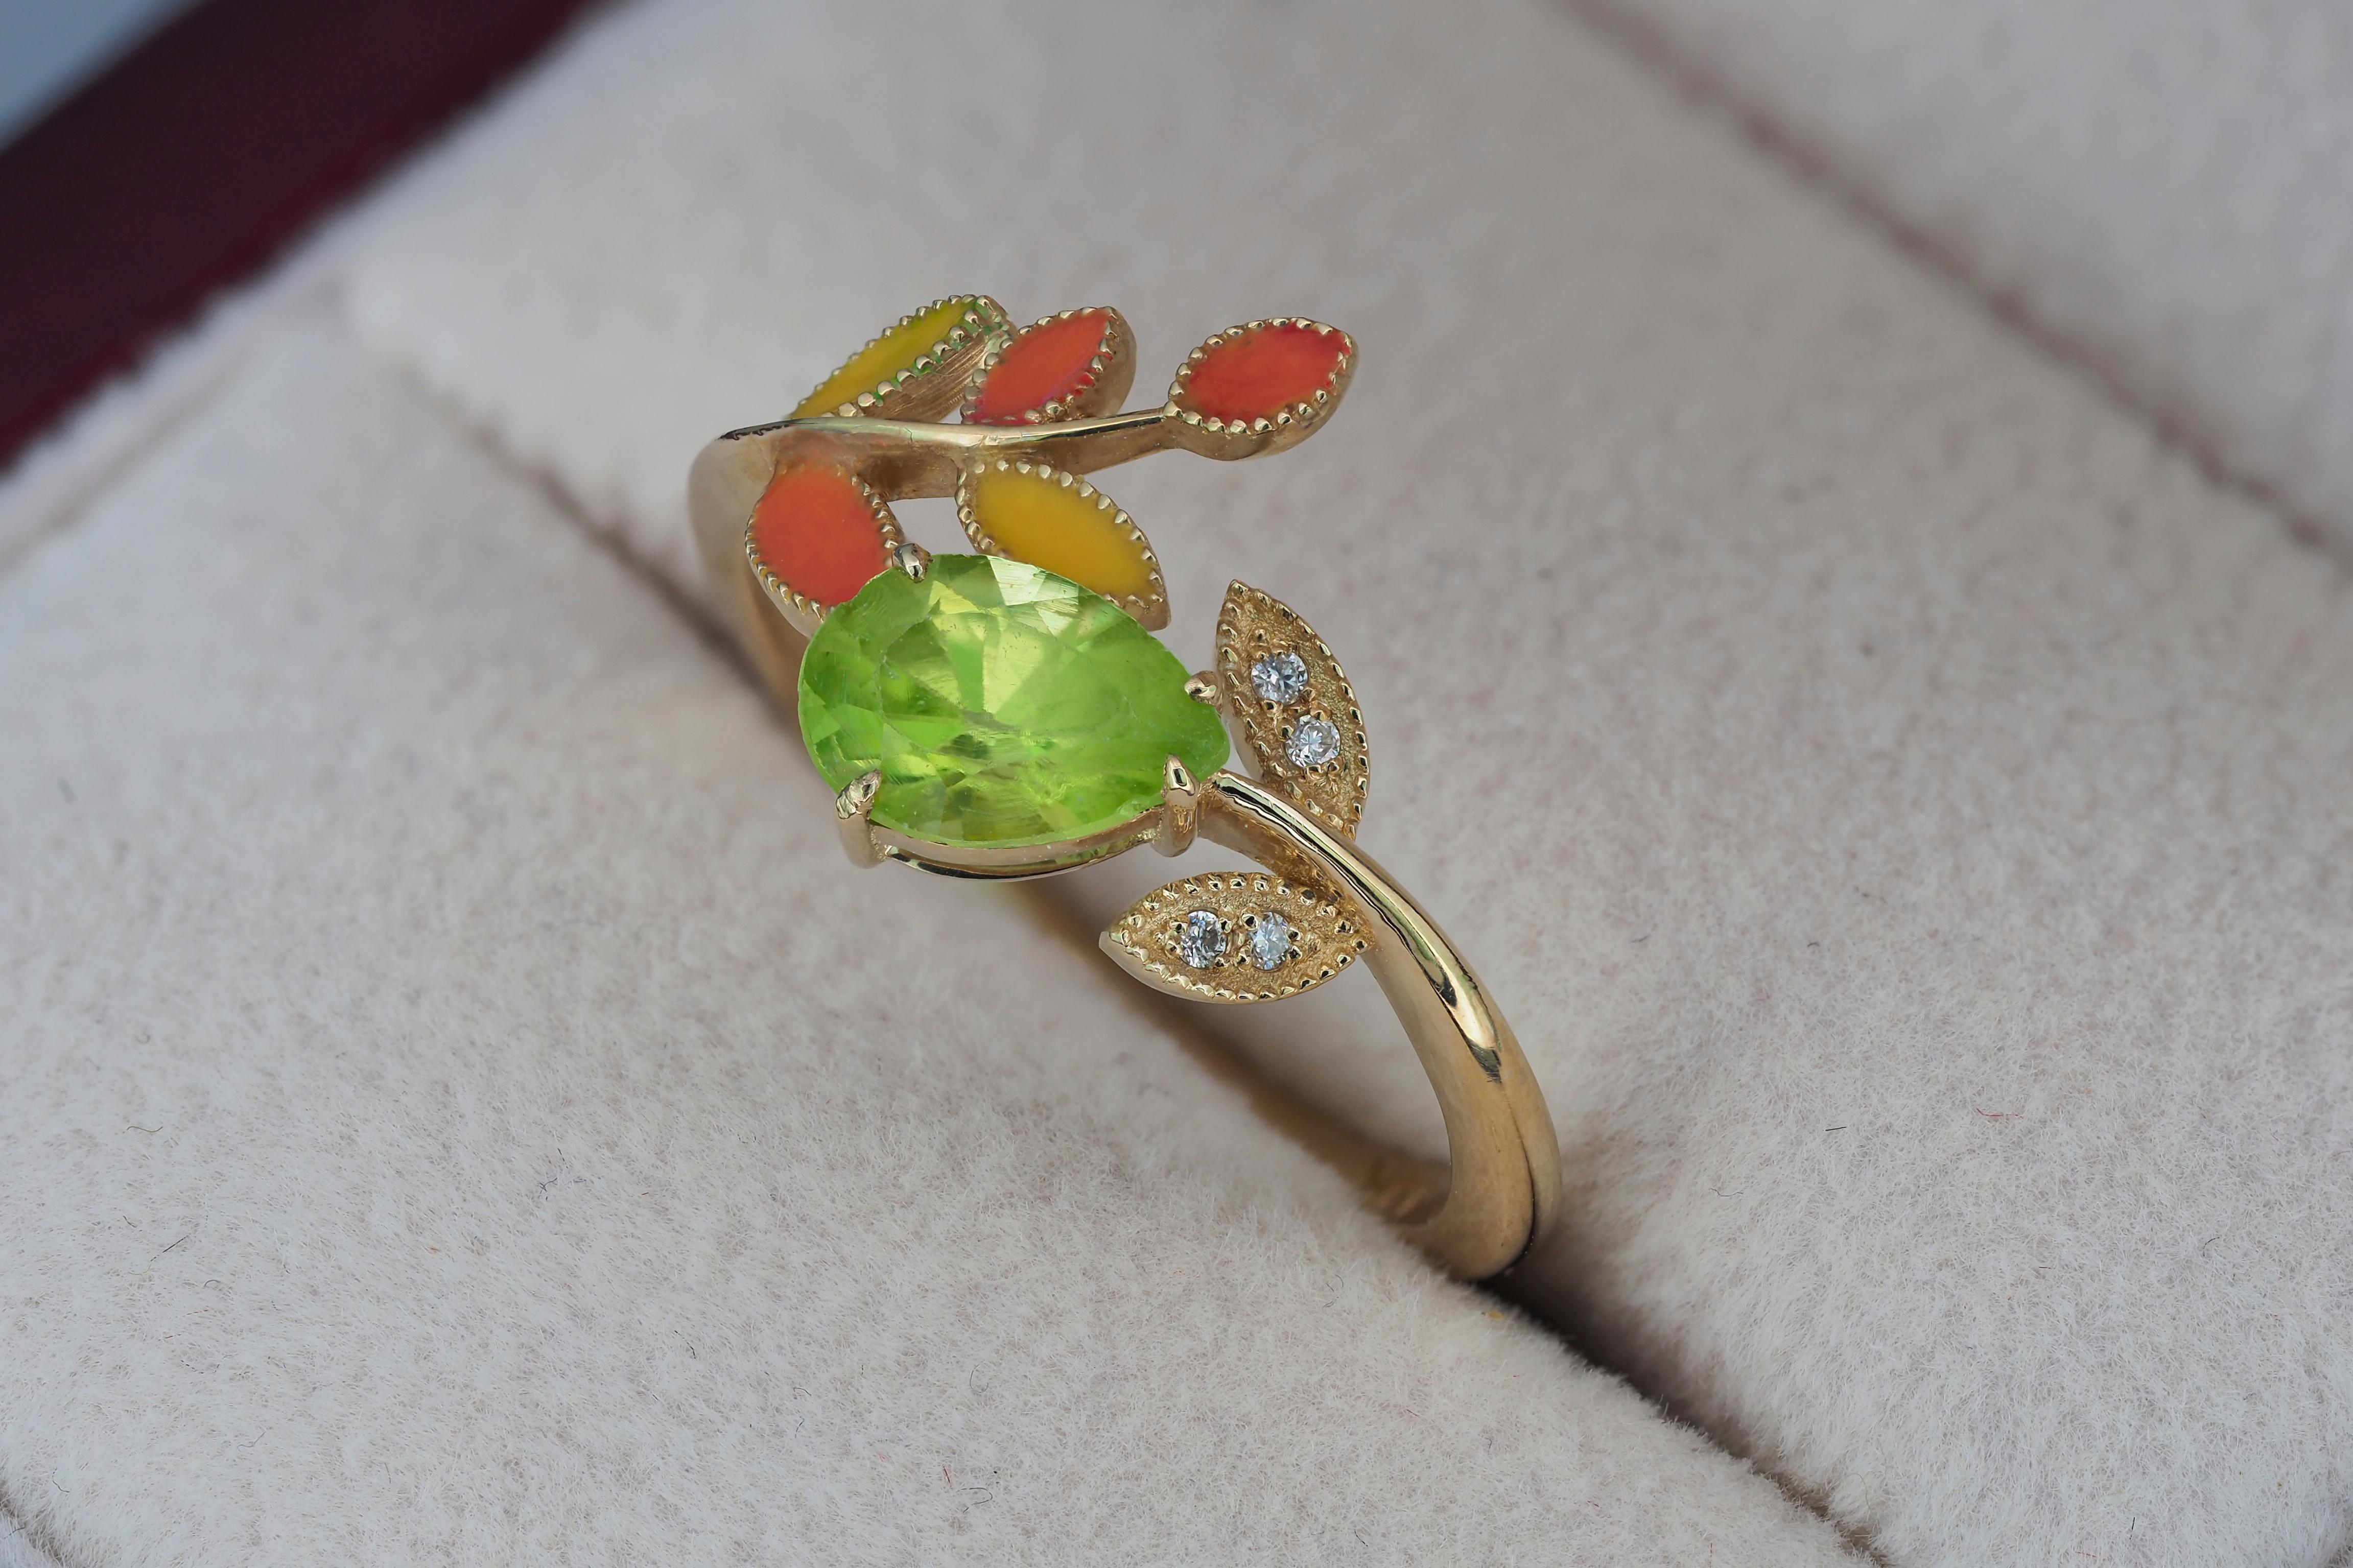 For Sale:  14k Gold Ring with Enamel Autumn Color Leaves with Peridot, Diamonds 9